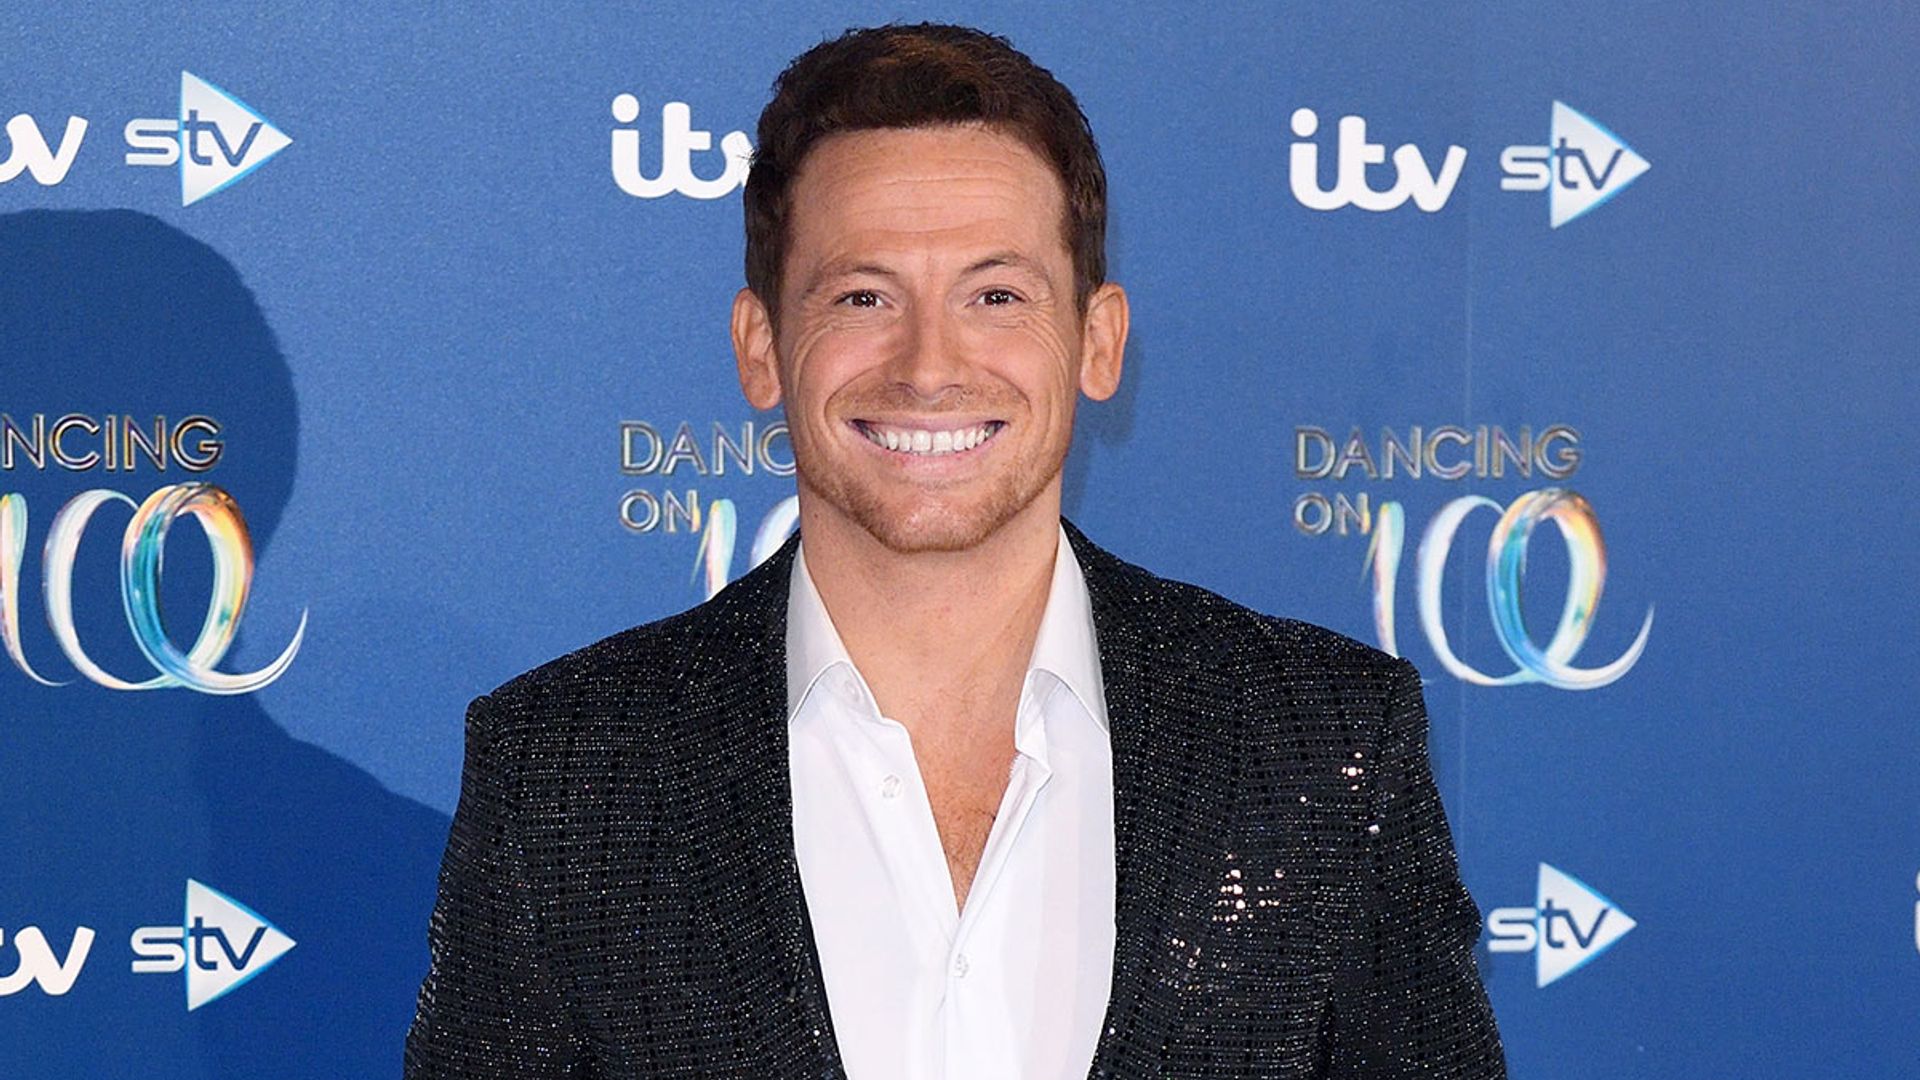 Dancing on Ice star Joe Swash talks candidly about his bankruptcy